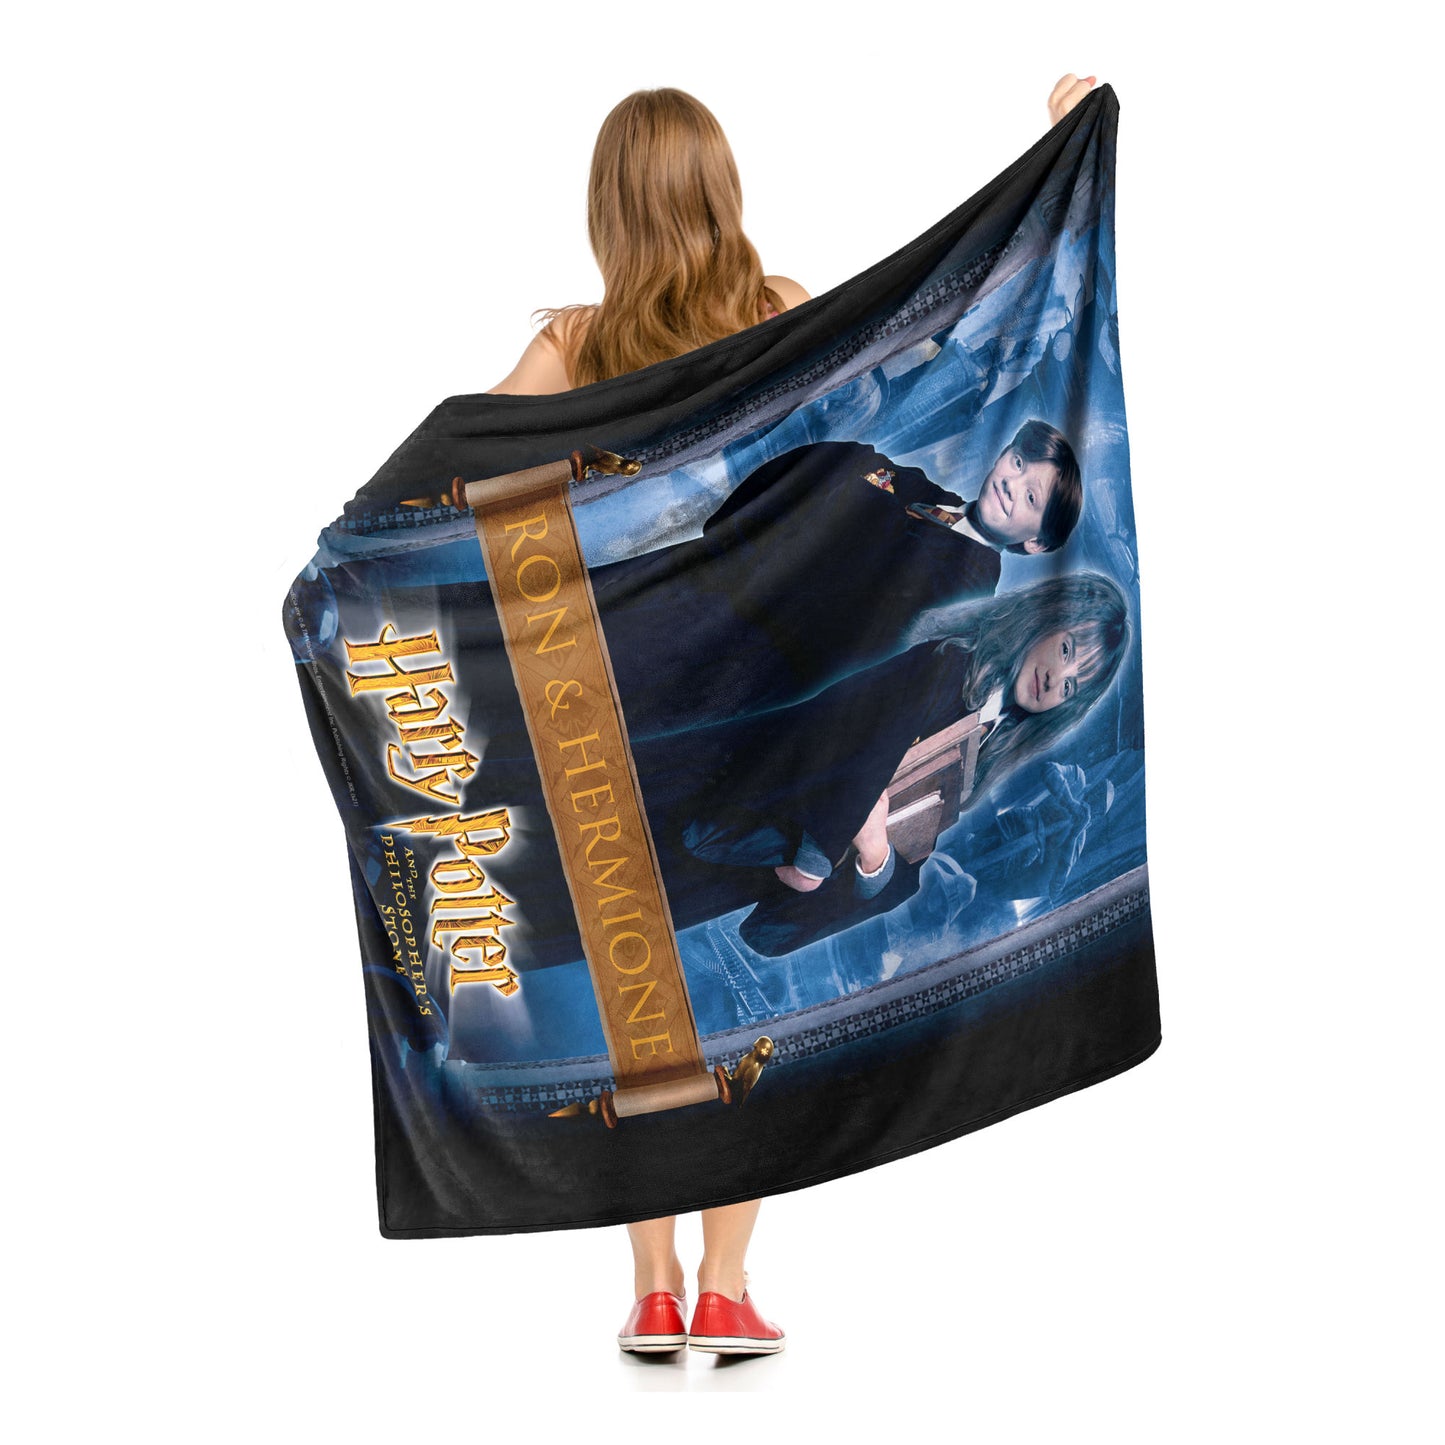 Harry Potter, Ron and Hermione Throw Blanket 50"x60"